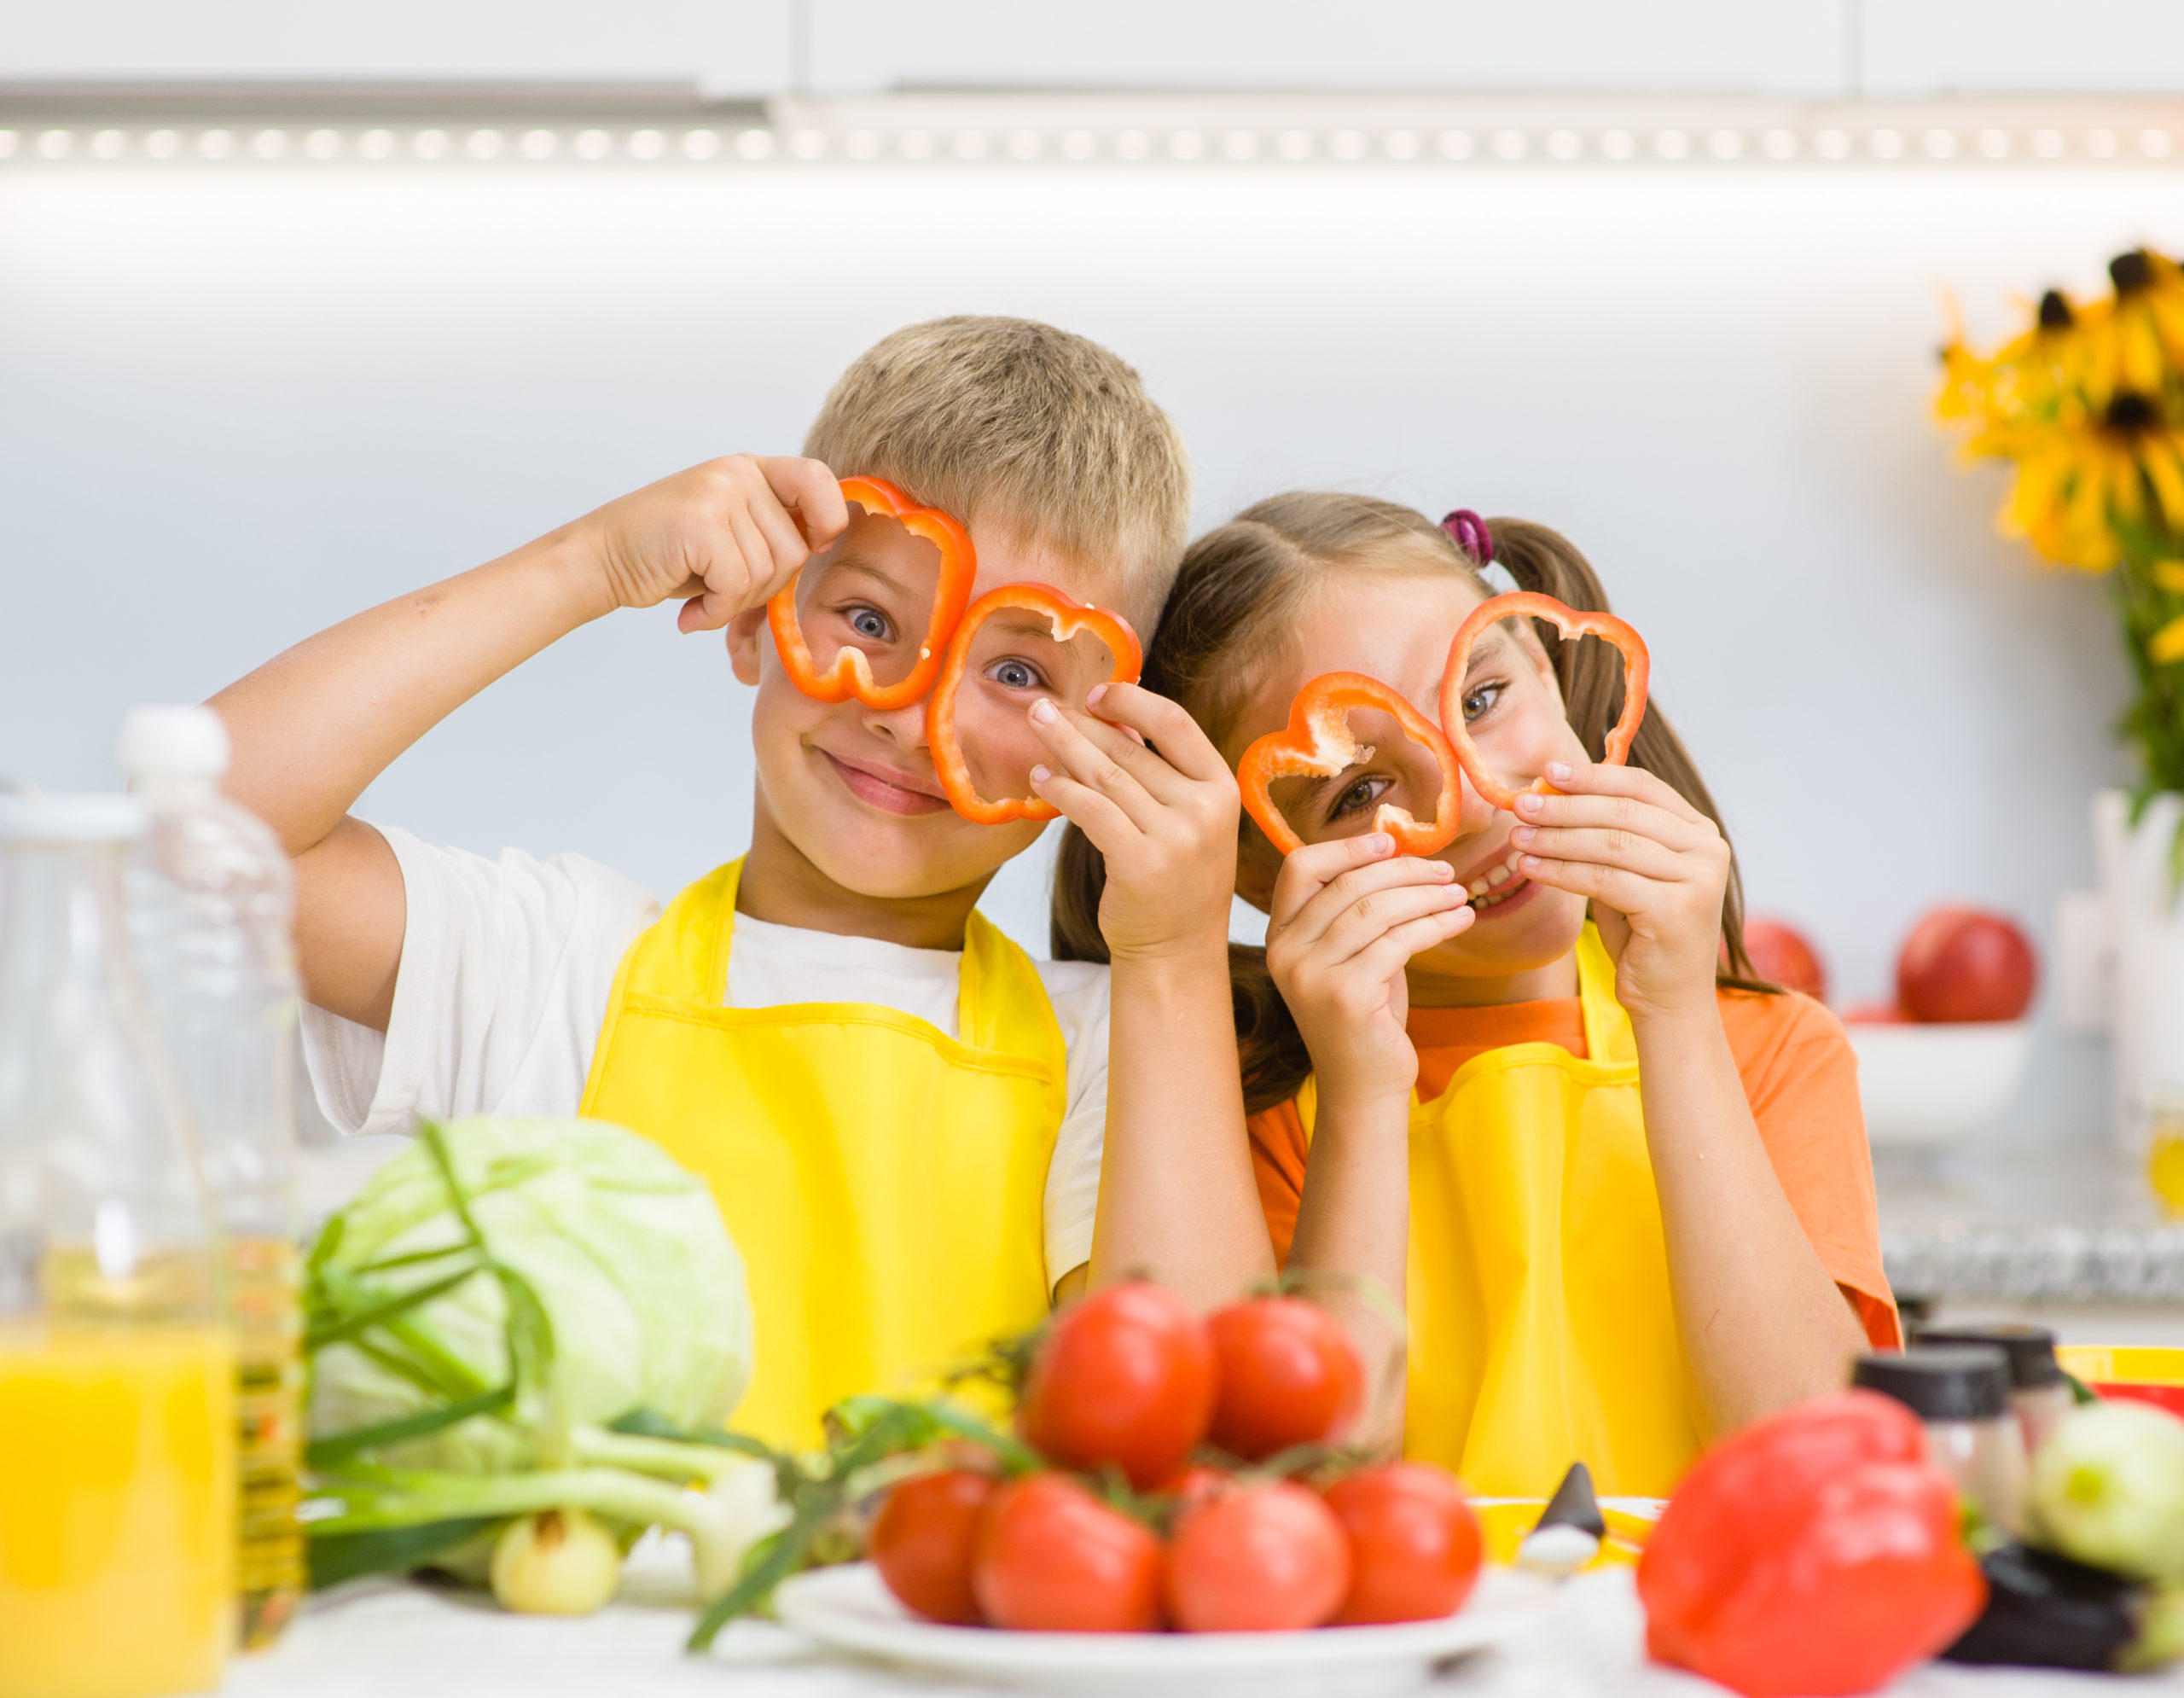 Two children with vegetables and peppers holding the peppers over their eyes like glasses